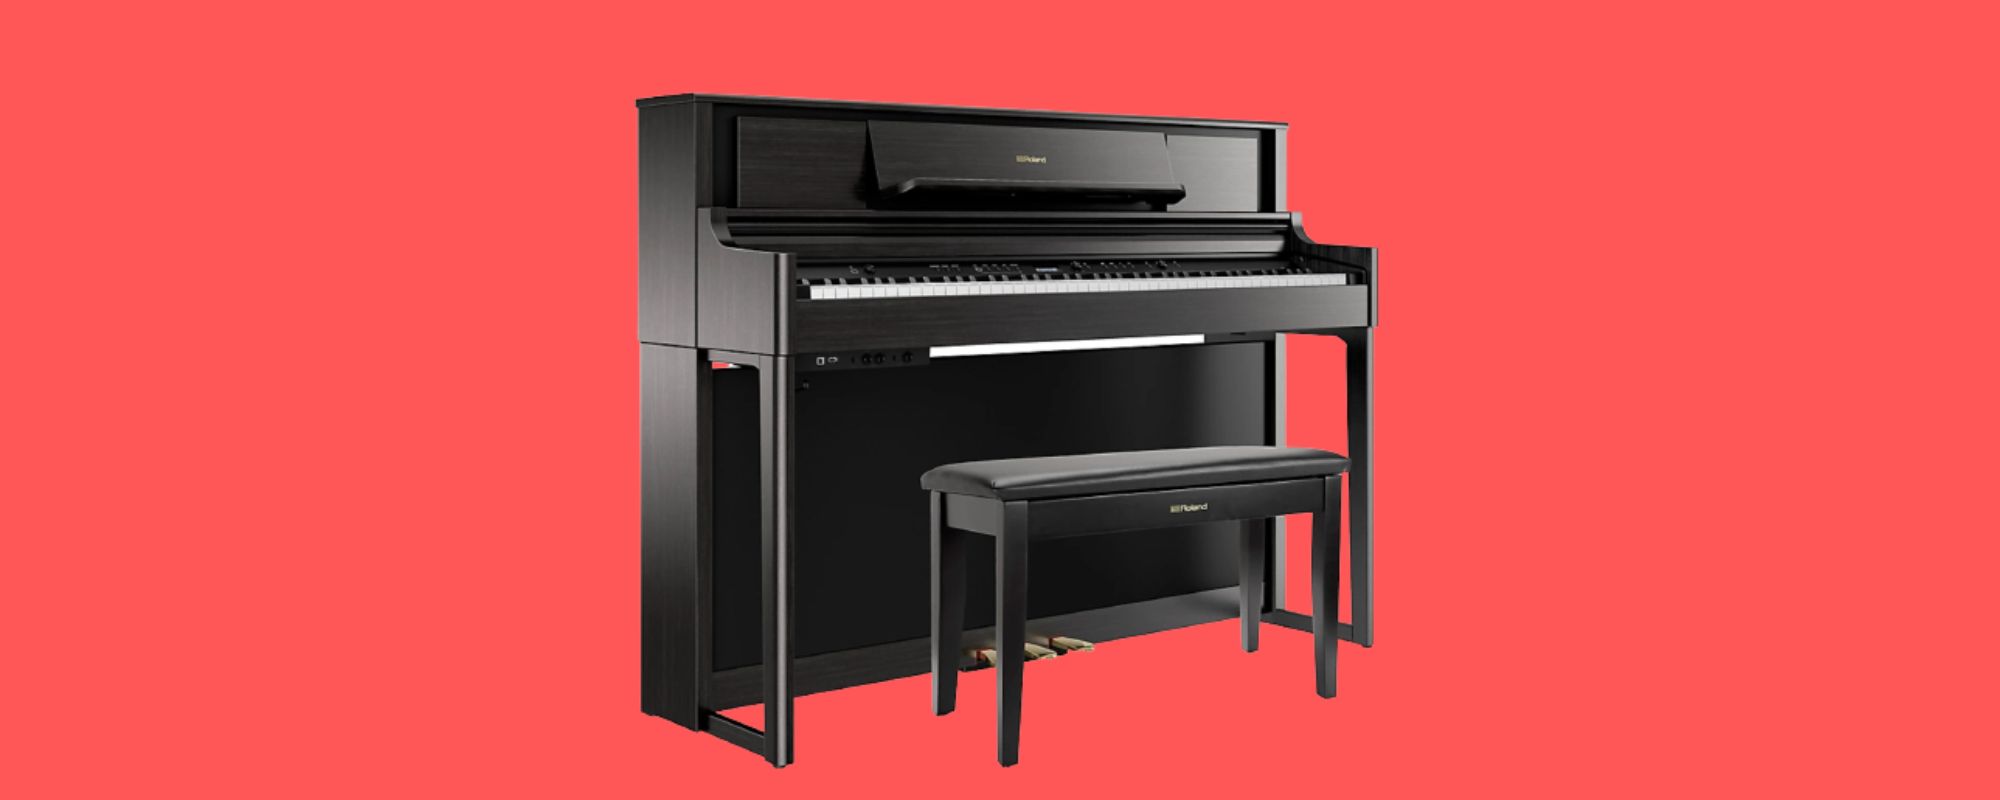 Donner's Latest Digital Piano Is Stylish With the Sound of a Grand Piano